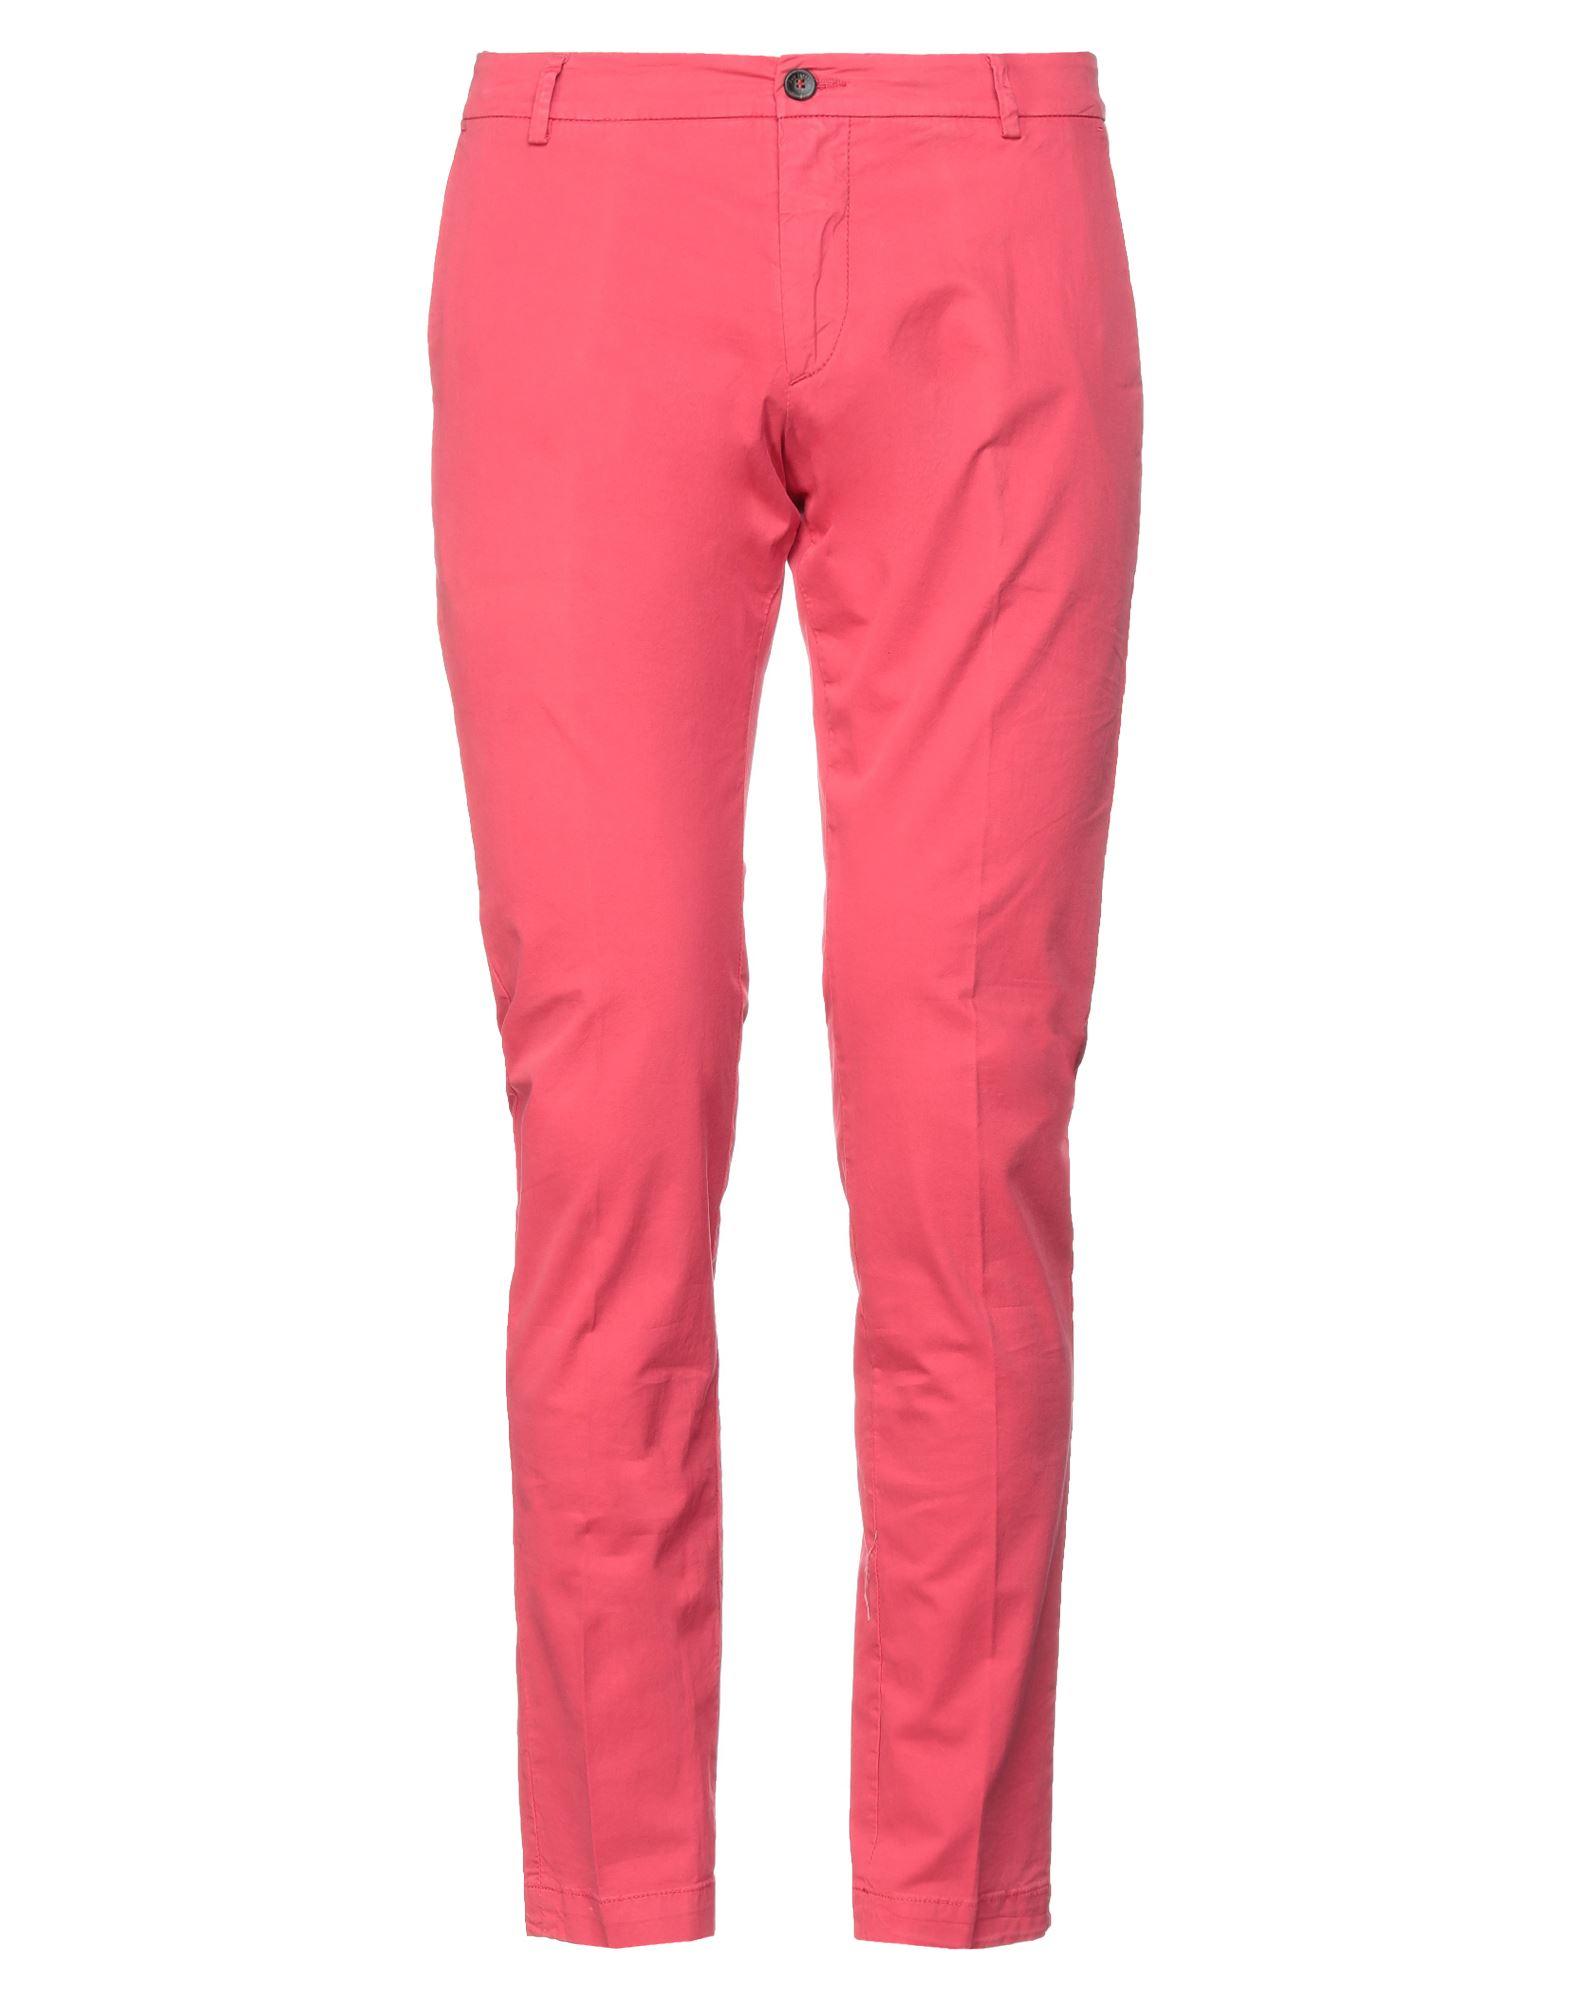 Roy Rogers Cotton Trouser in Coral (Pink) for Men - Lyst